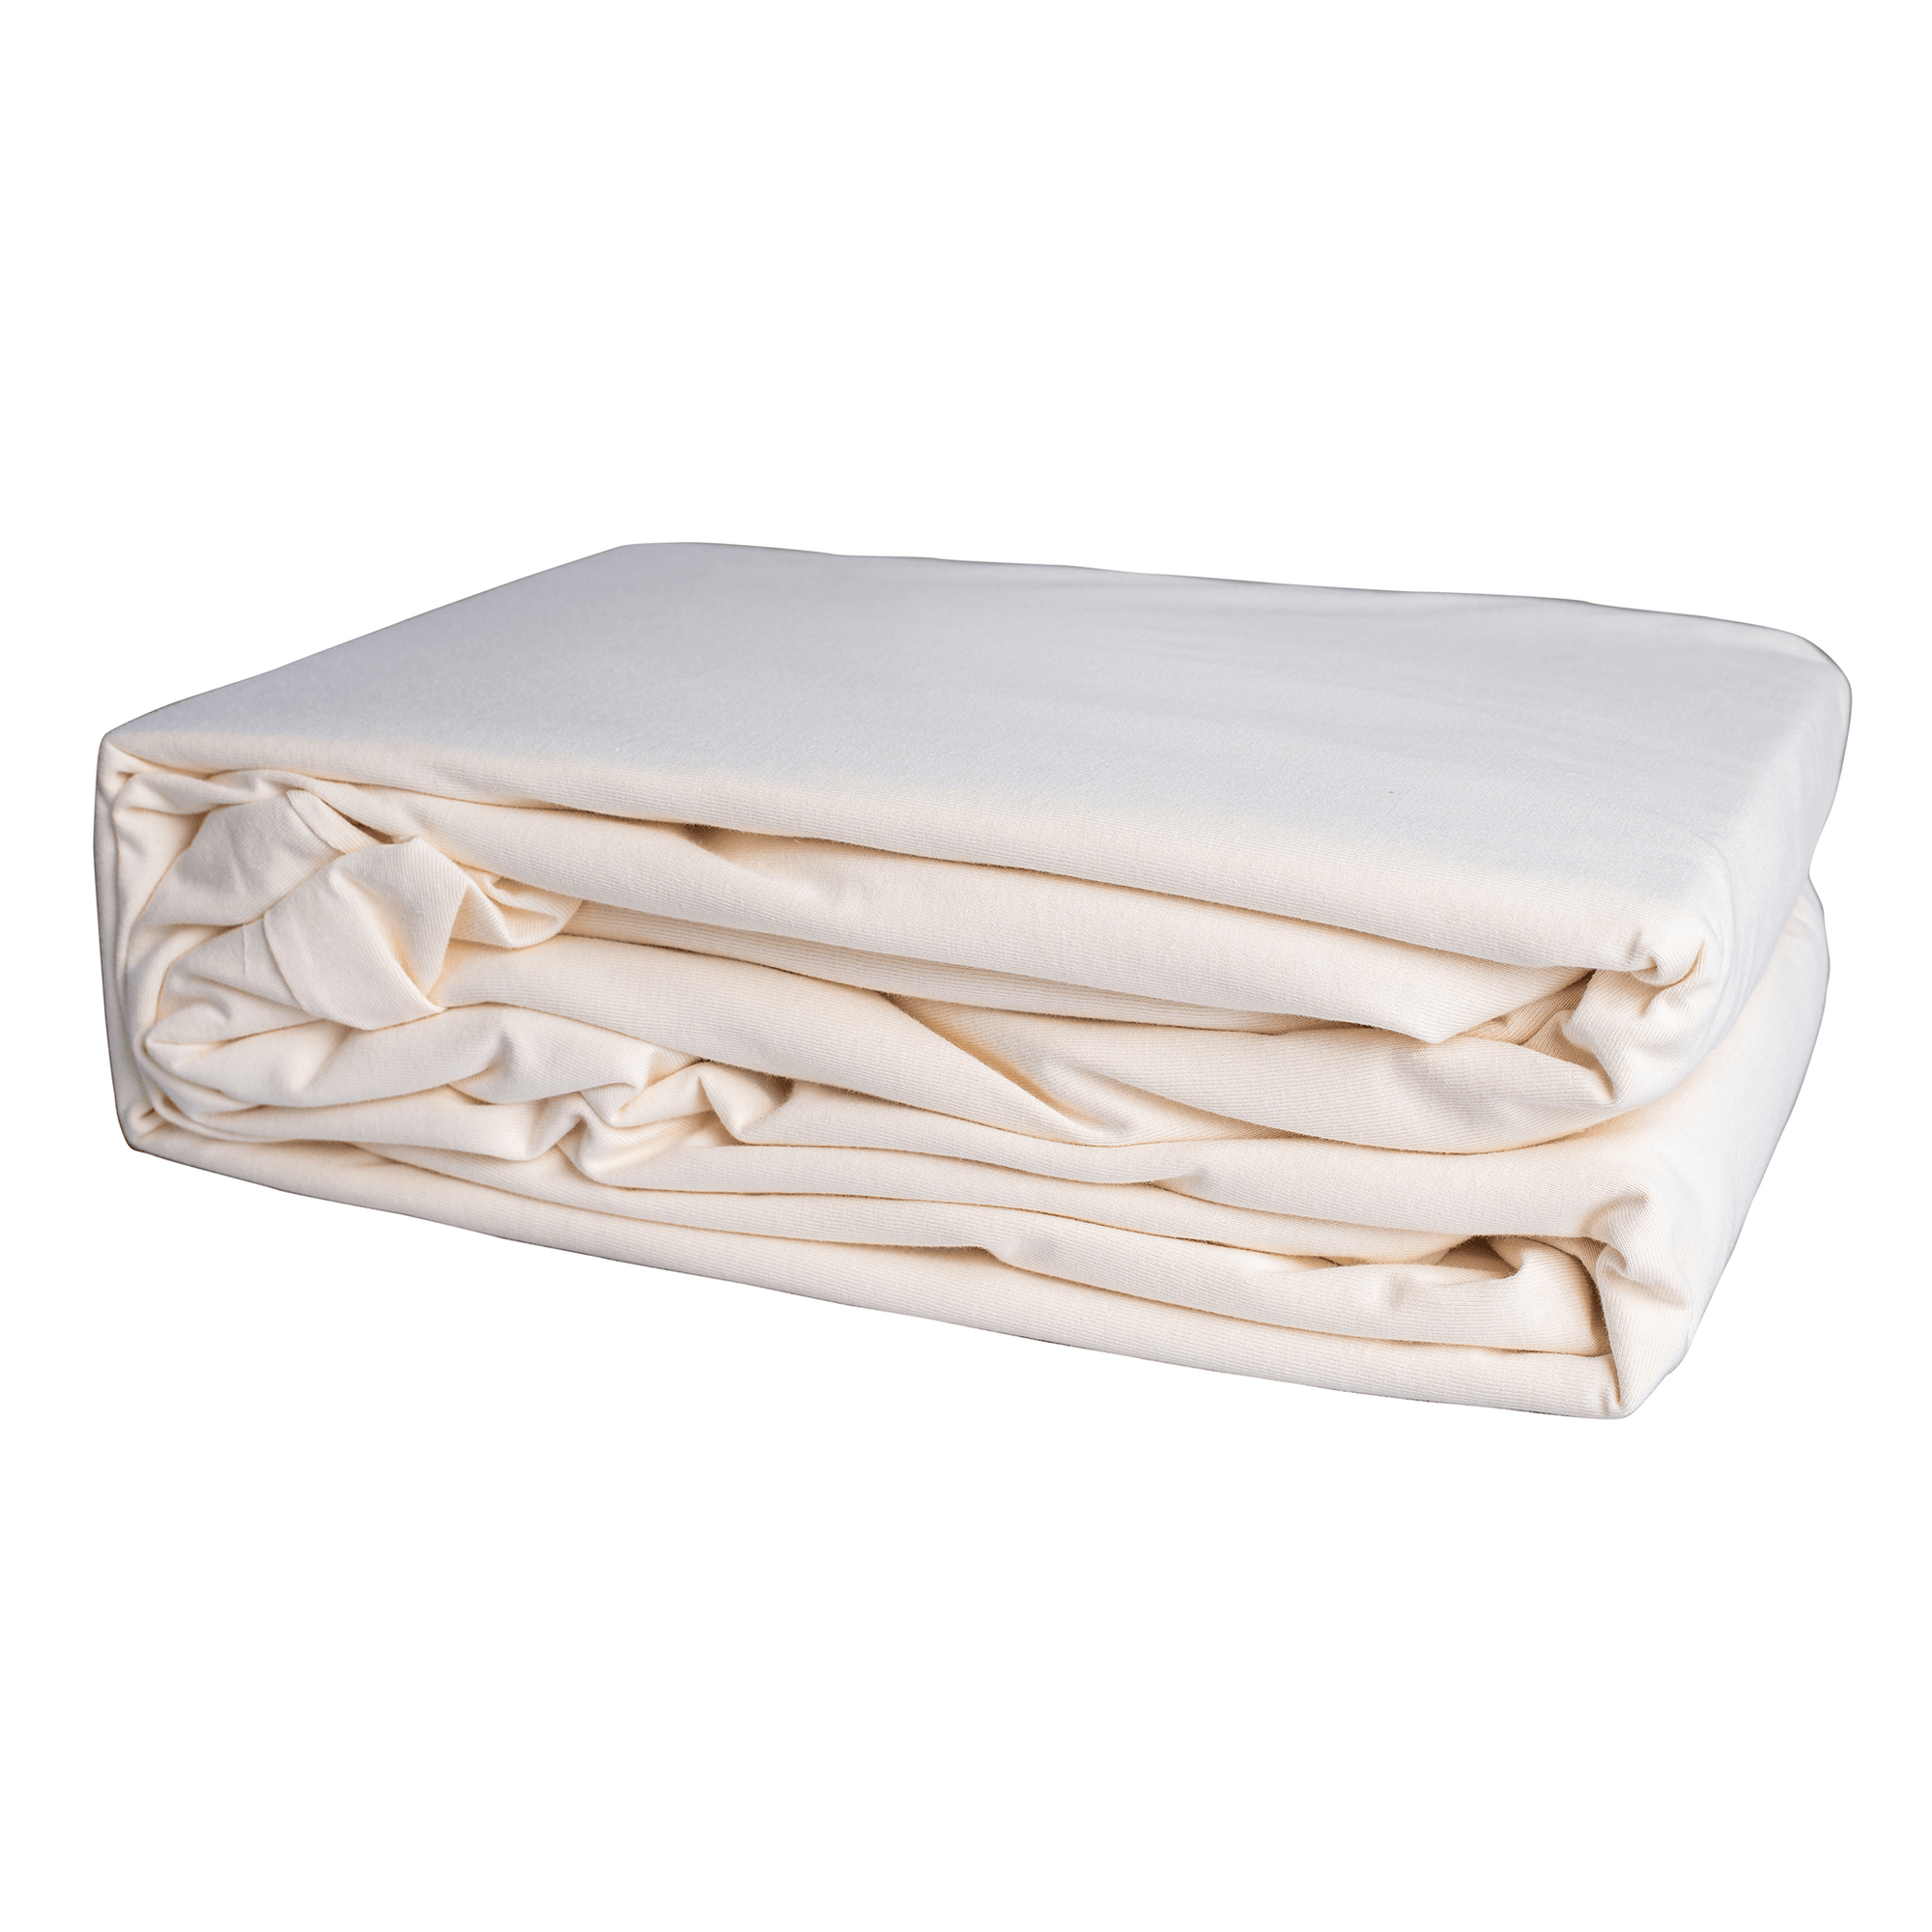 The ultimate organic mattress protector. Top fabric: two layers of 100% organic cotton jersey, laminated with our signature TPU in between. Skirt: 100% organic cotton jersey. 100% waterproof. 